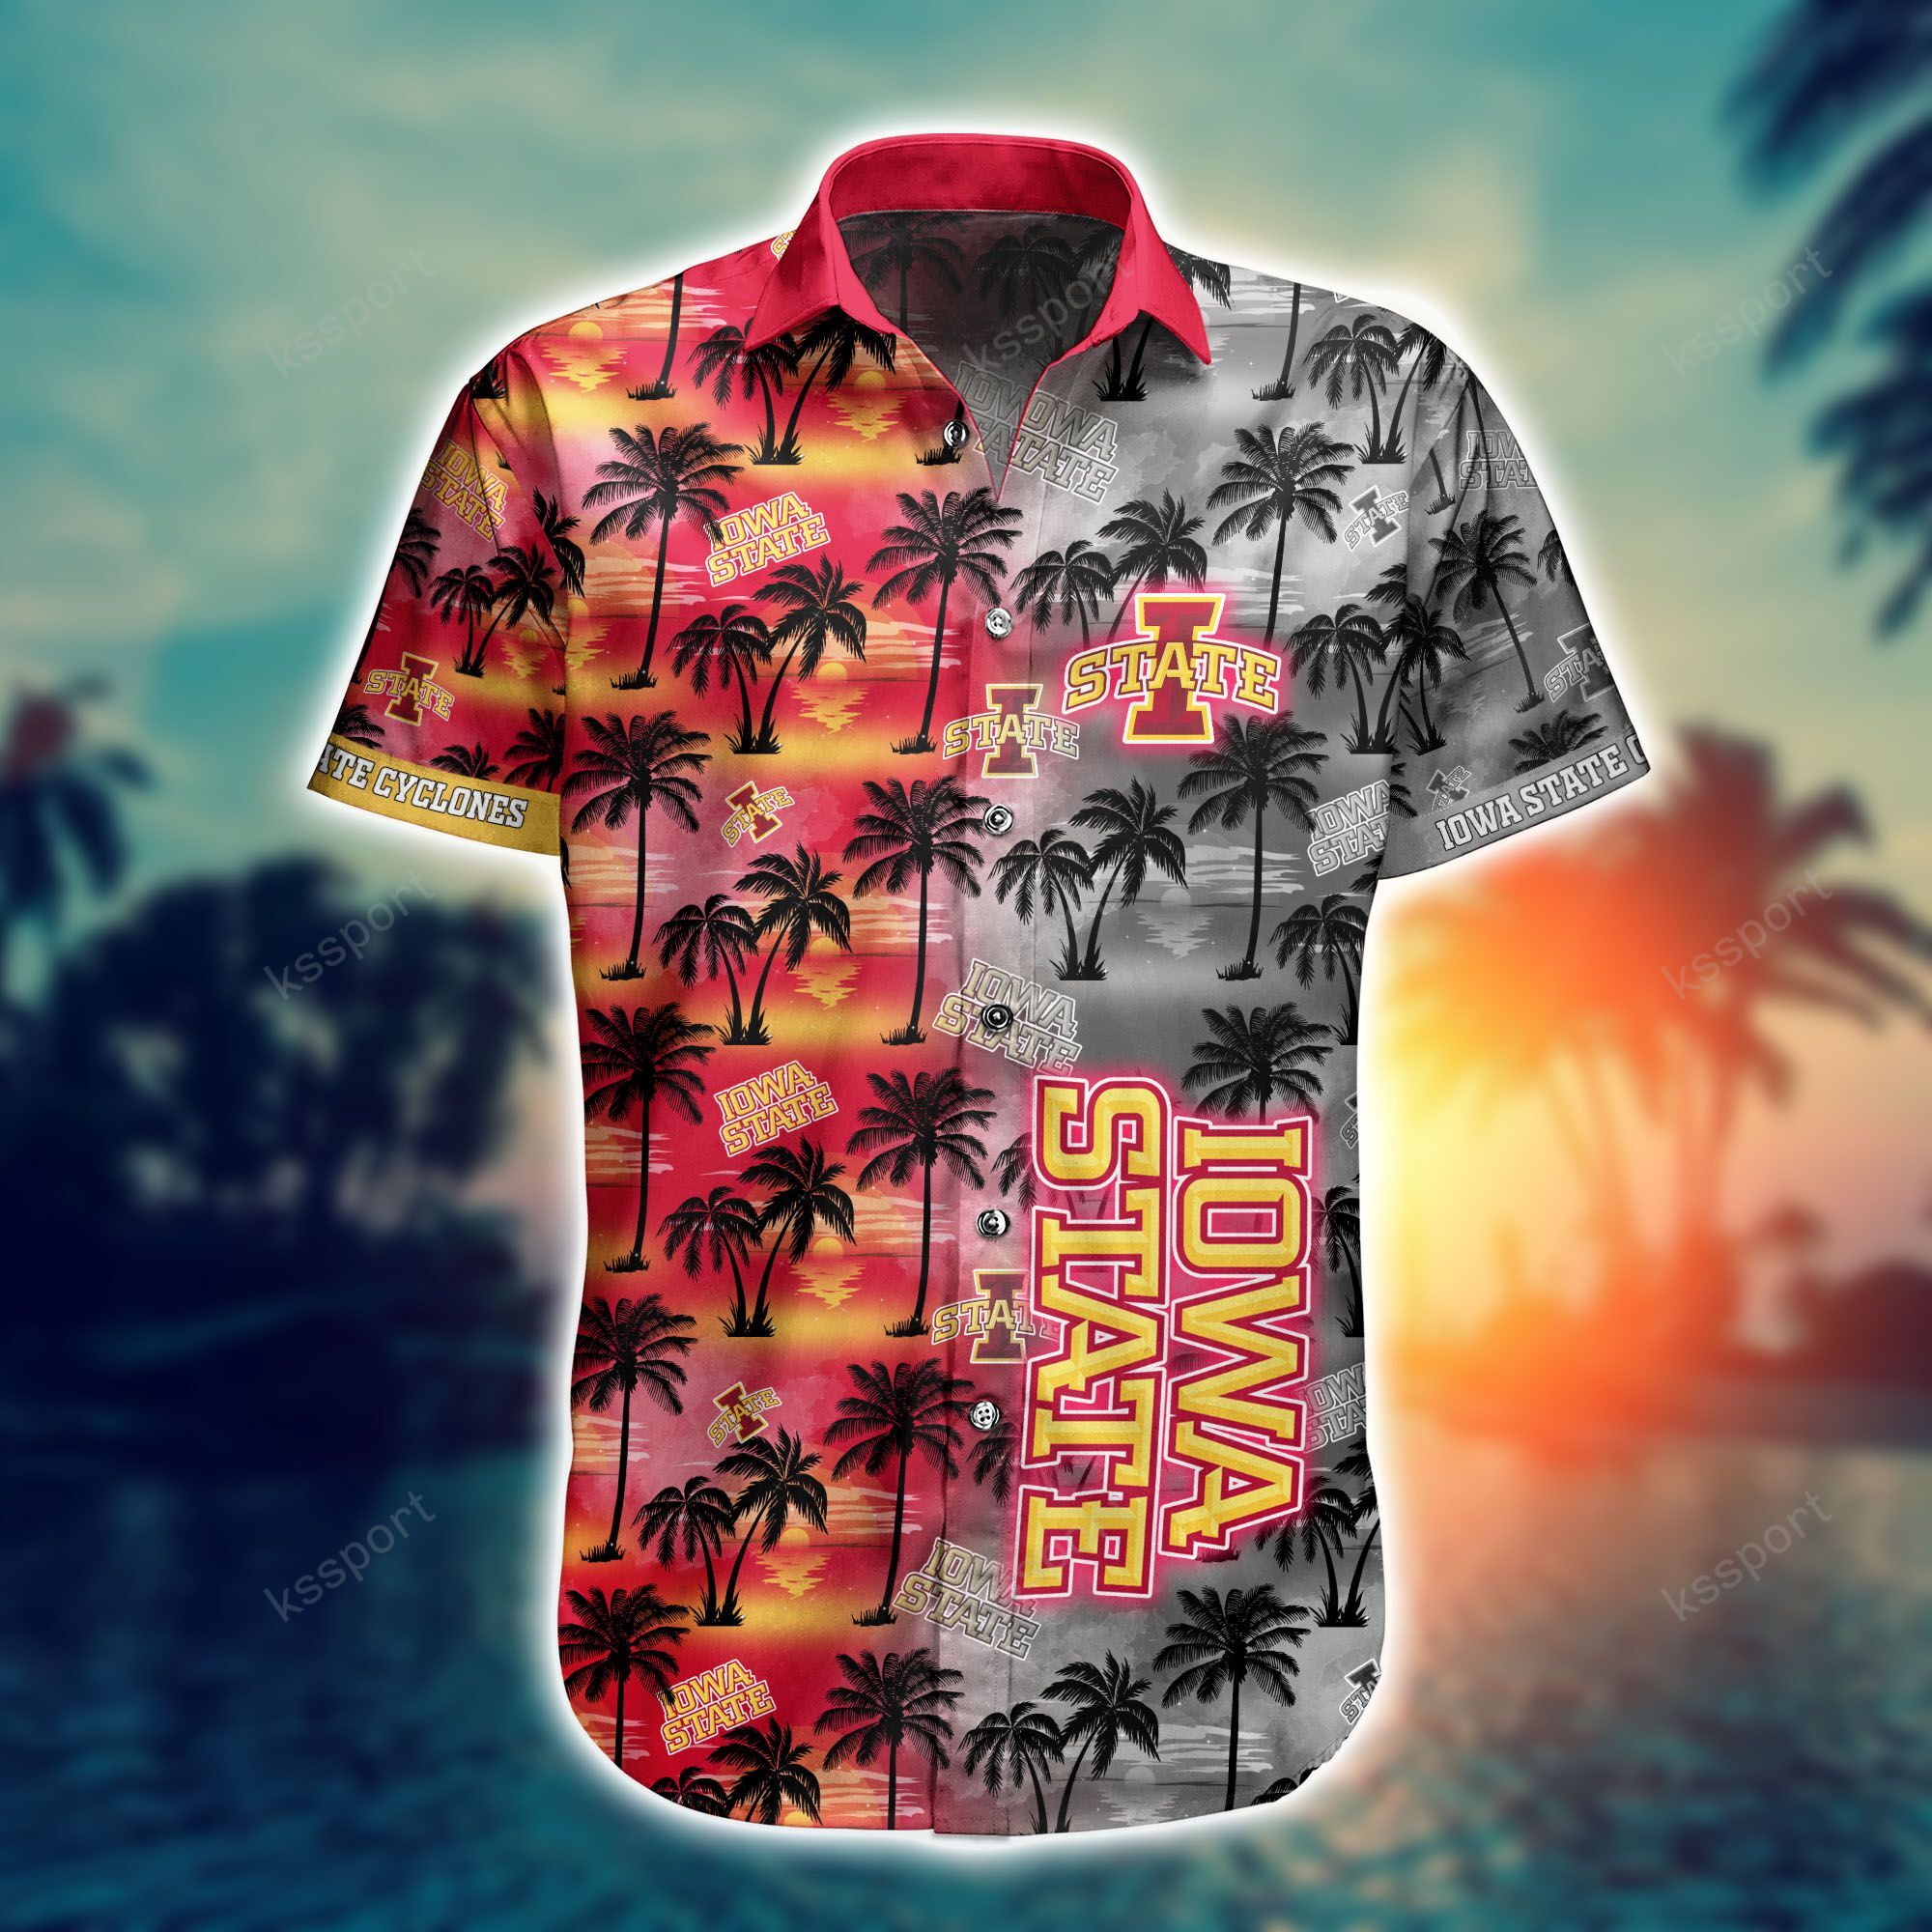 Top cool Hawaiian shirt 2022 - Make sure you get yours today before they run out! 140